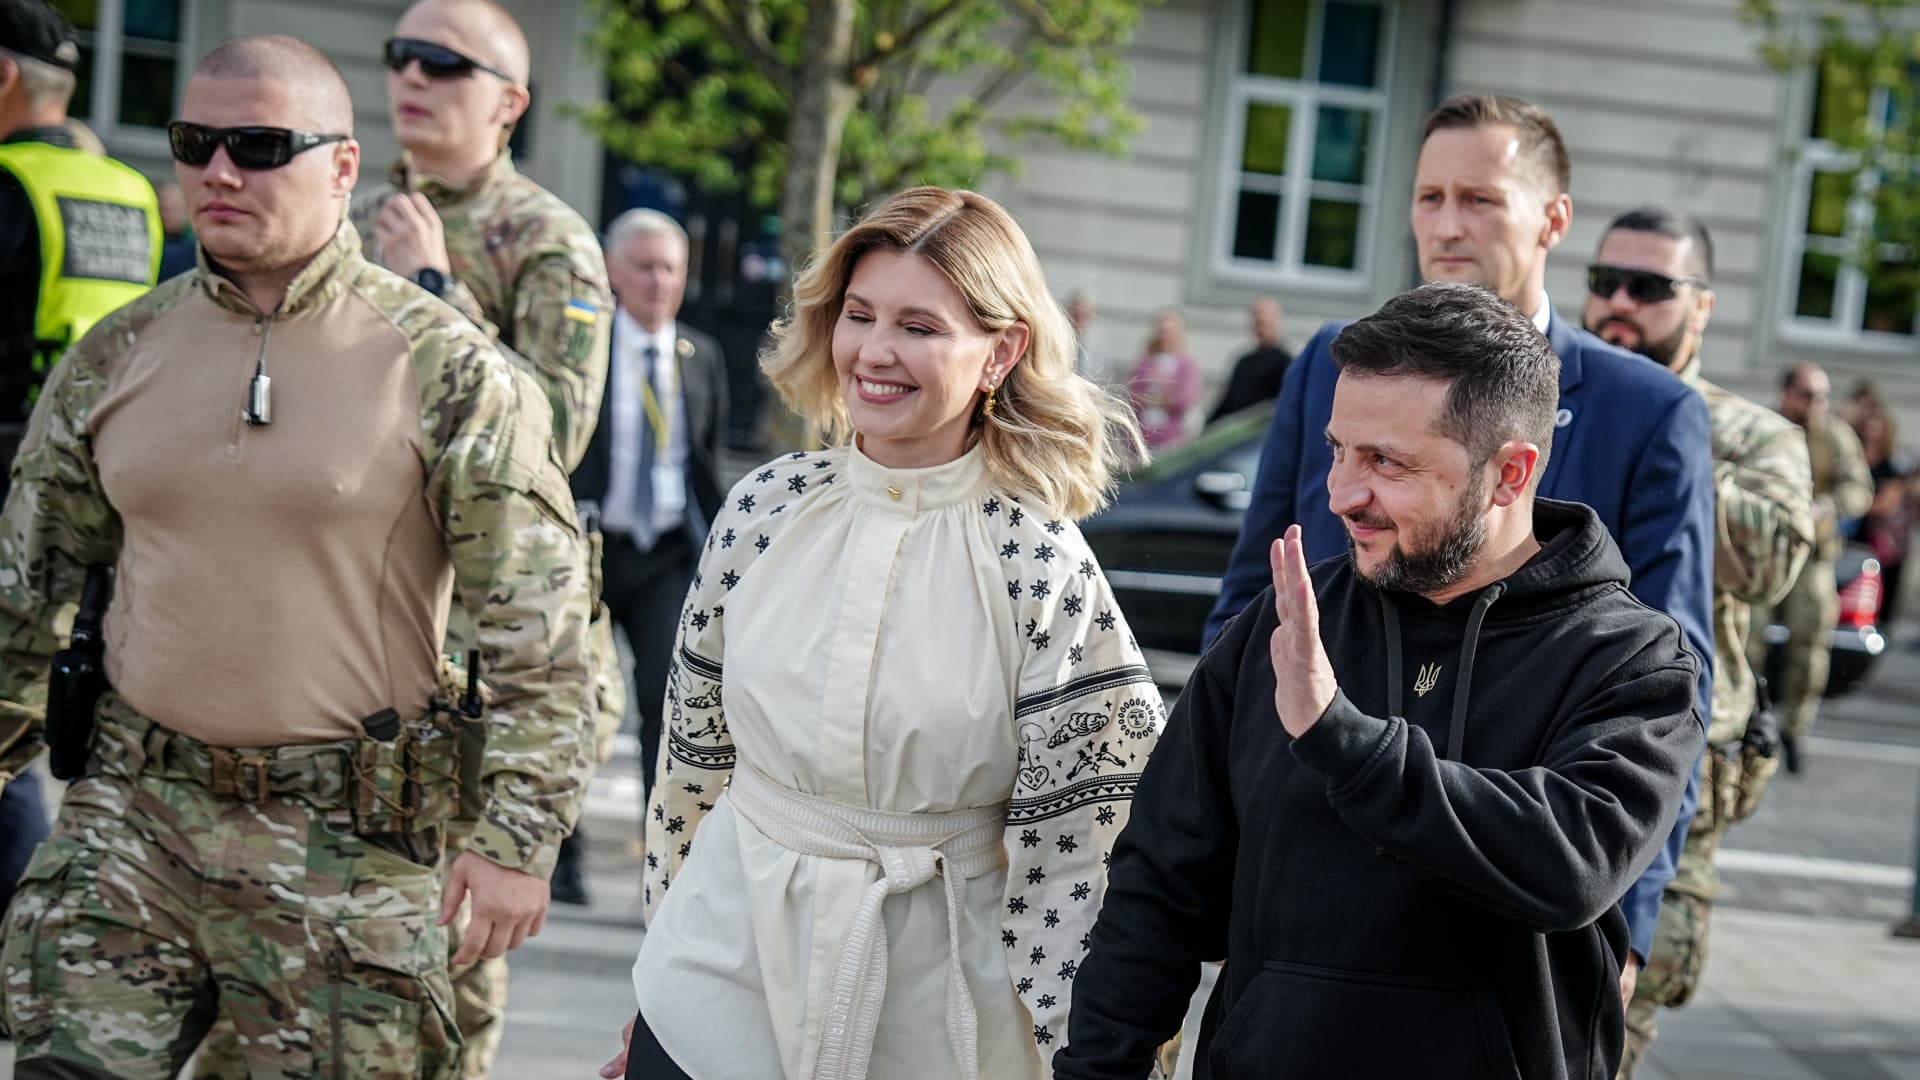 Volodymyr Zelenskyy, president of Ukraine, arrives with his wife, Olena Zelenska, for a public address in the Lithuanian capital on the sidelines of the NATO summit.